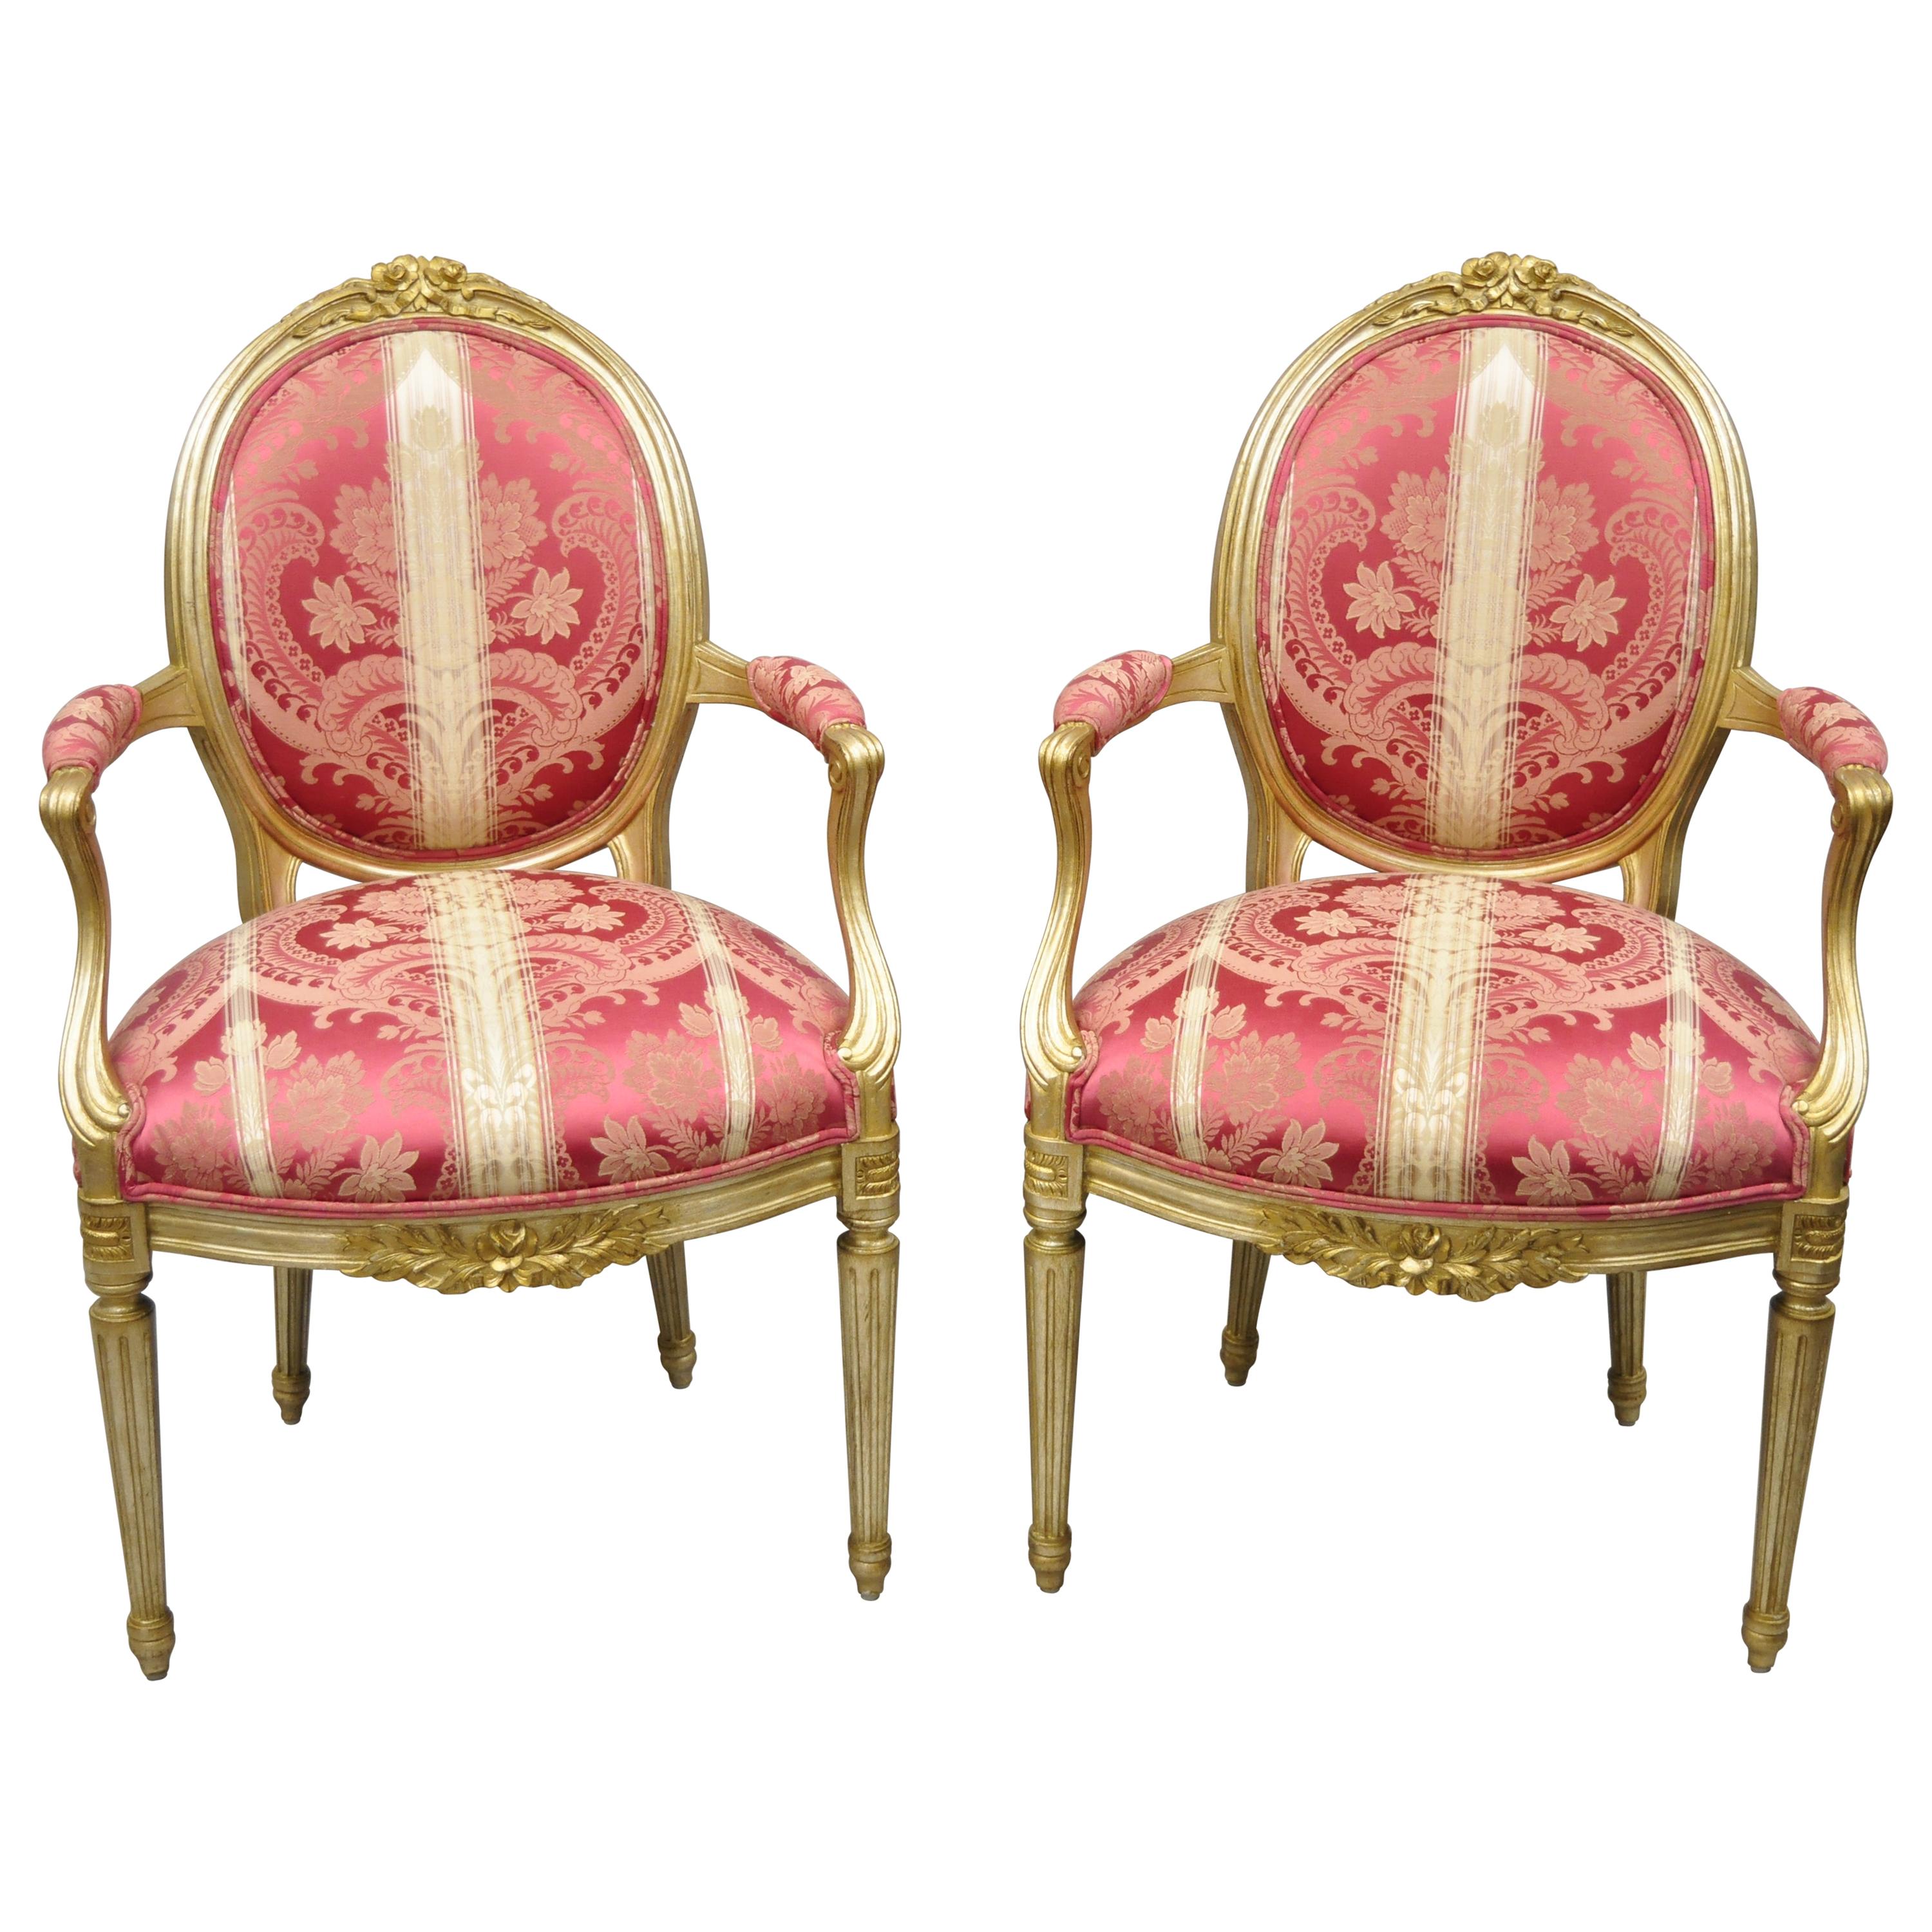 French Louis XVI Style Silver Gold Gilt Pink Damask Oval Back Arm Chairs, Pair